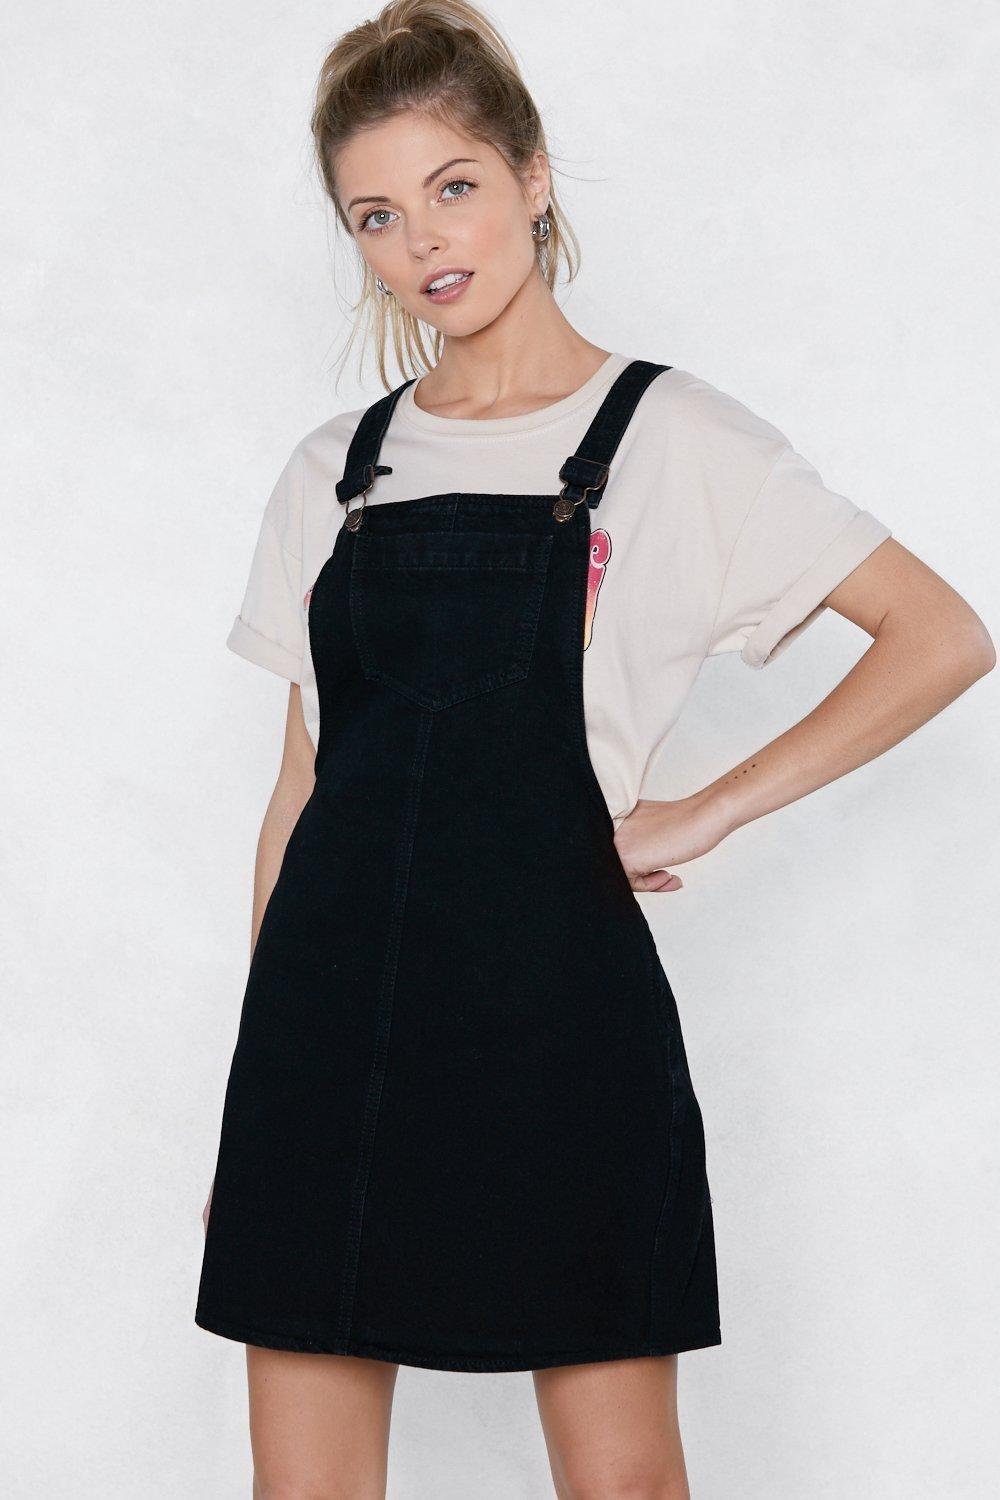 18 Pairs Of Overalls That Prove Overalls Look Great On Everyone